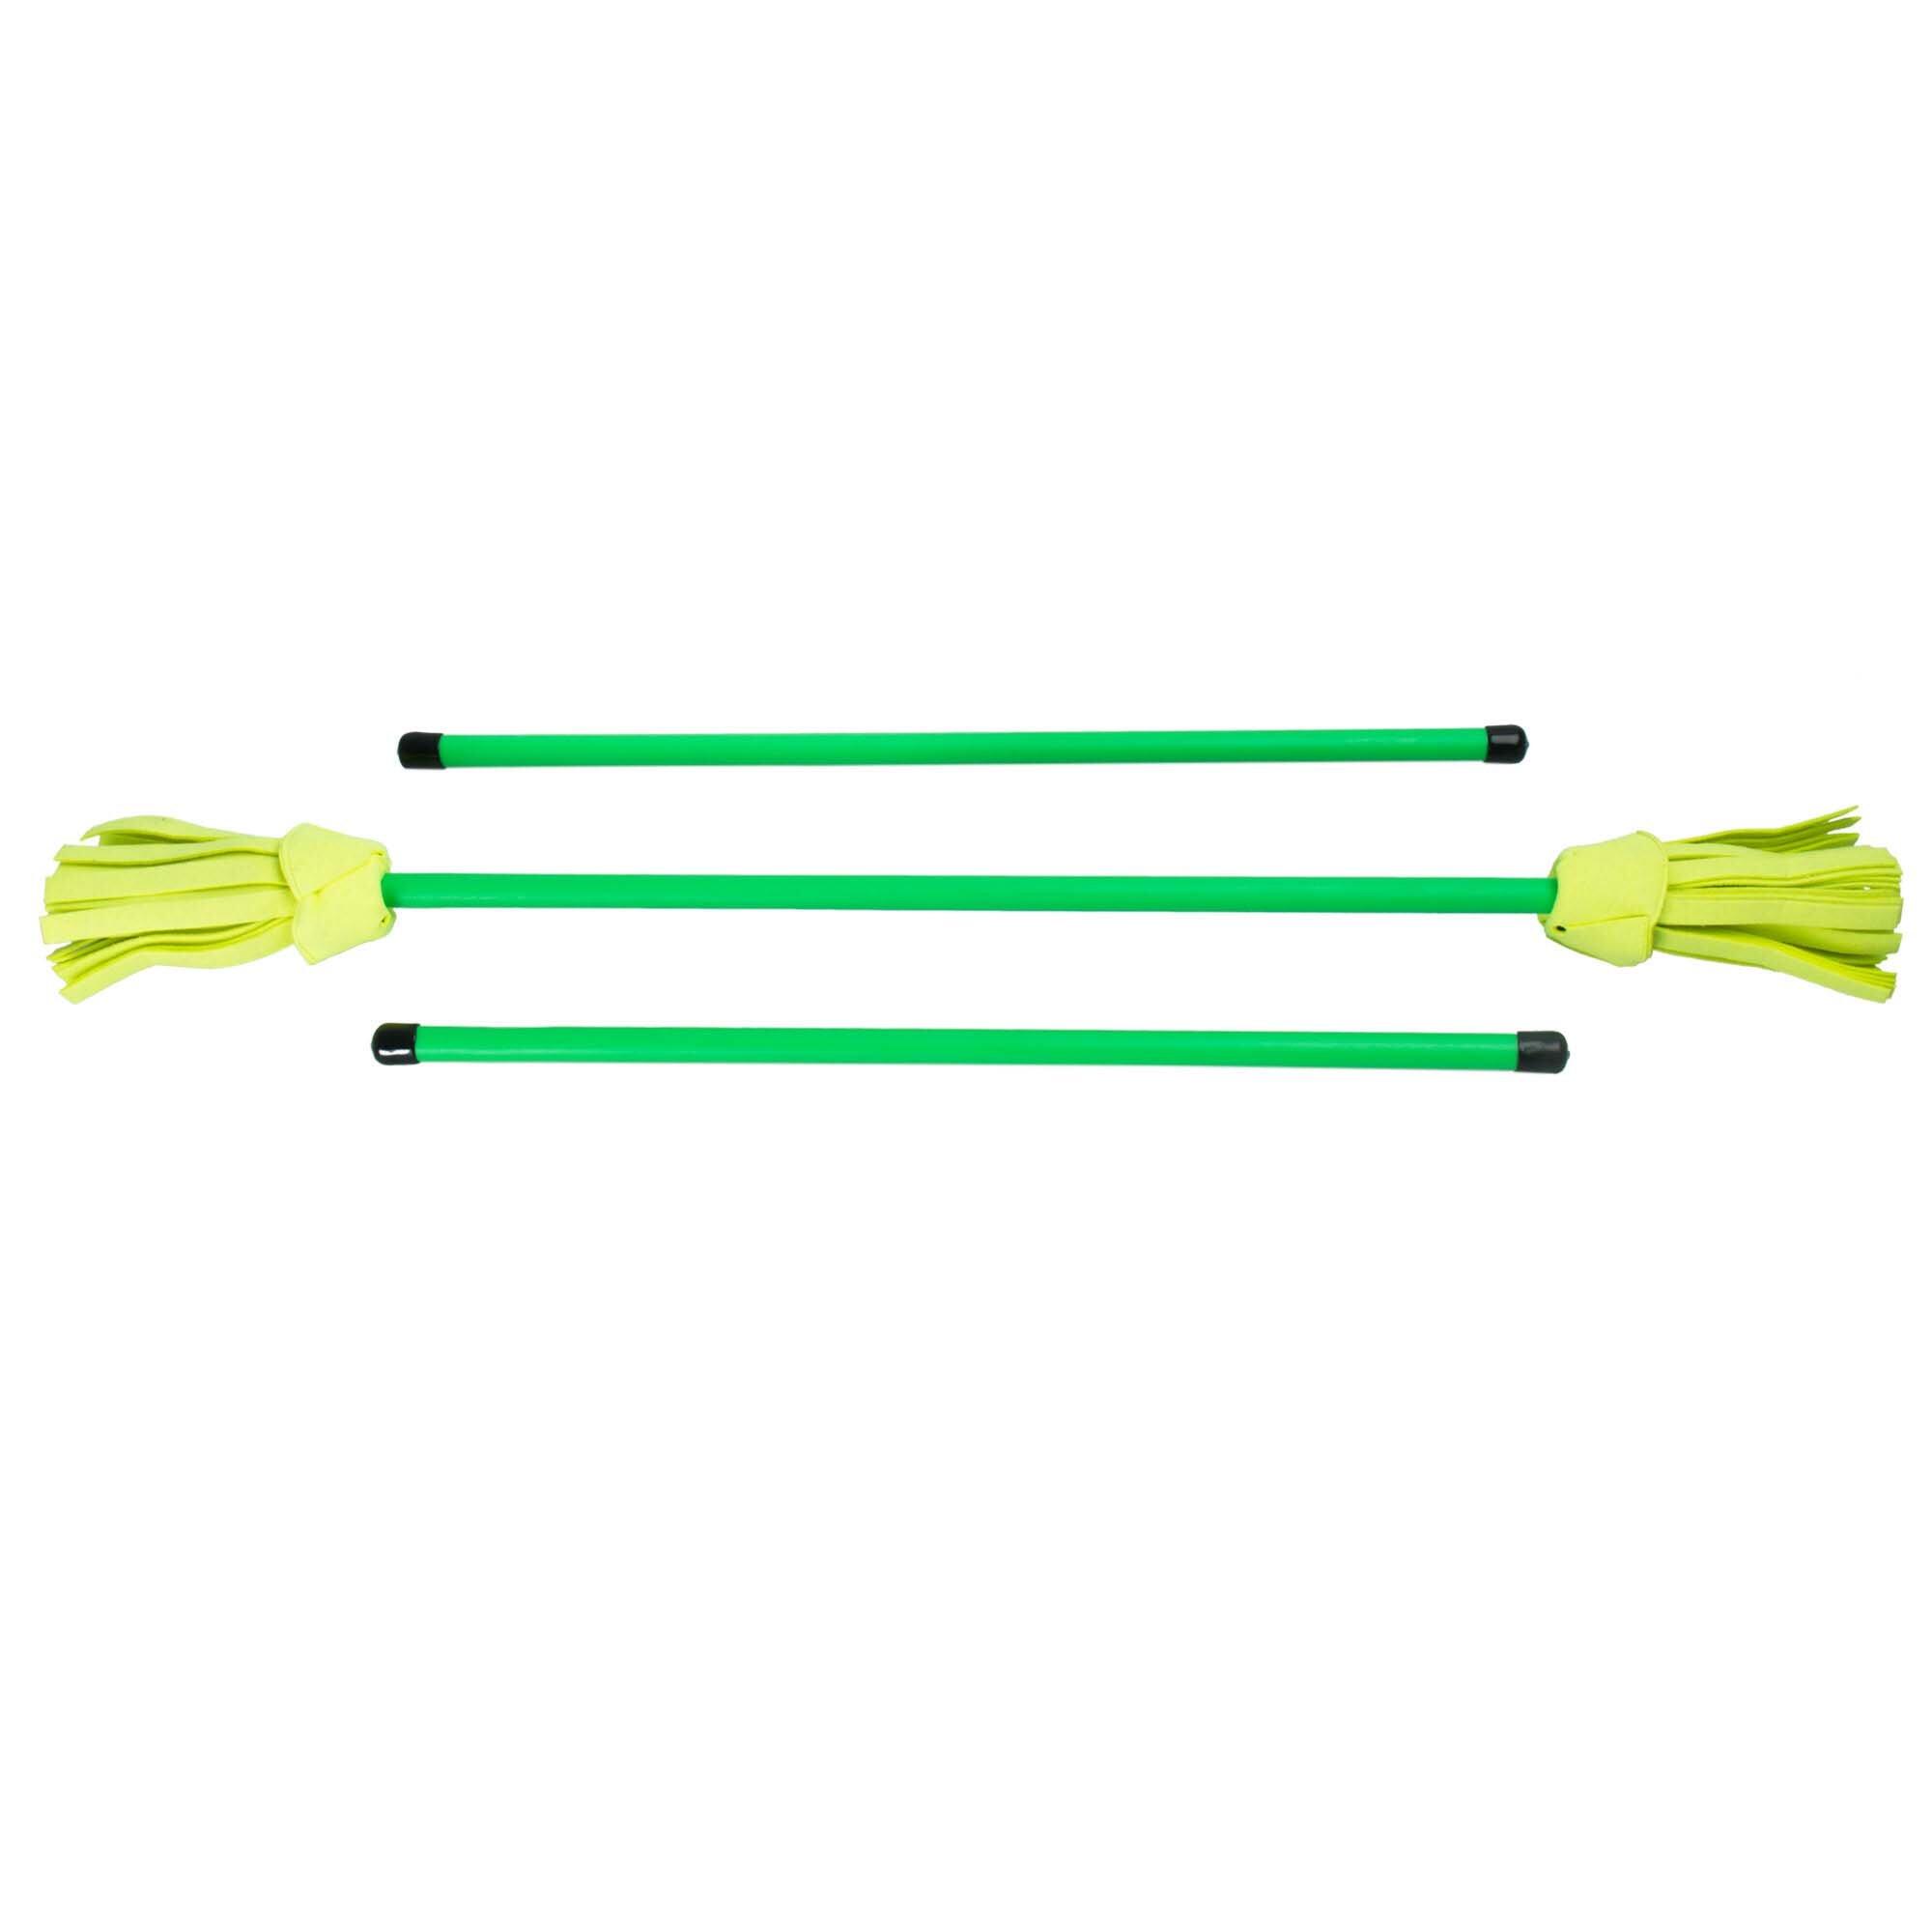 Neo Fluoro Flower Stick and Hand Sticks-Green with Yellow Tassels 2/3